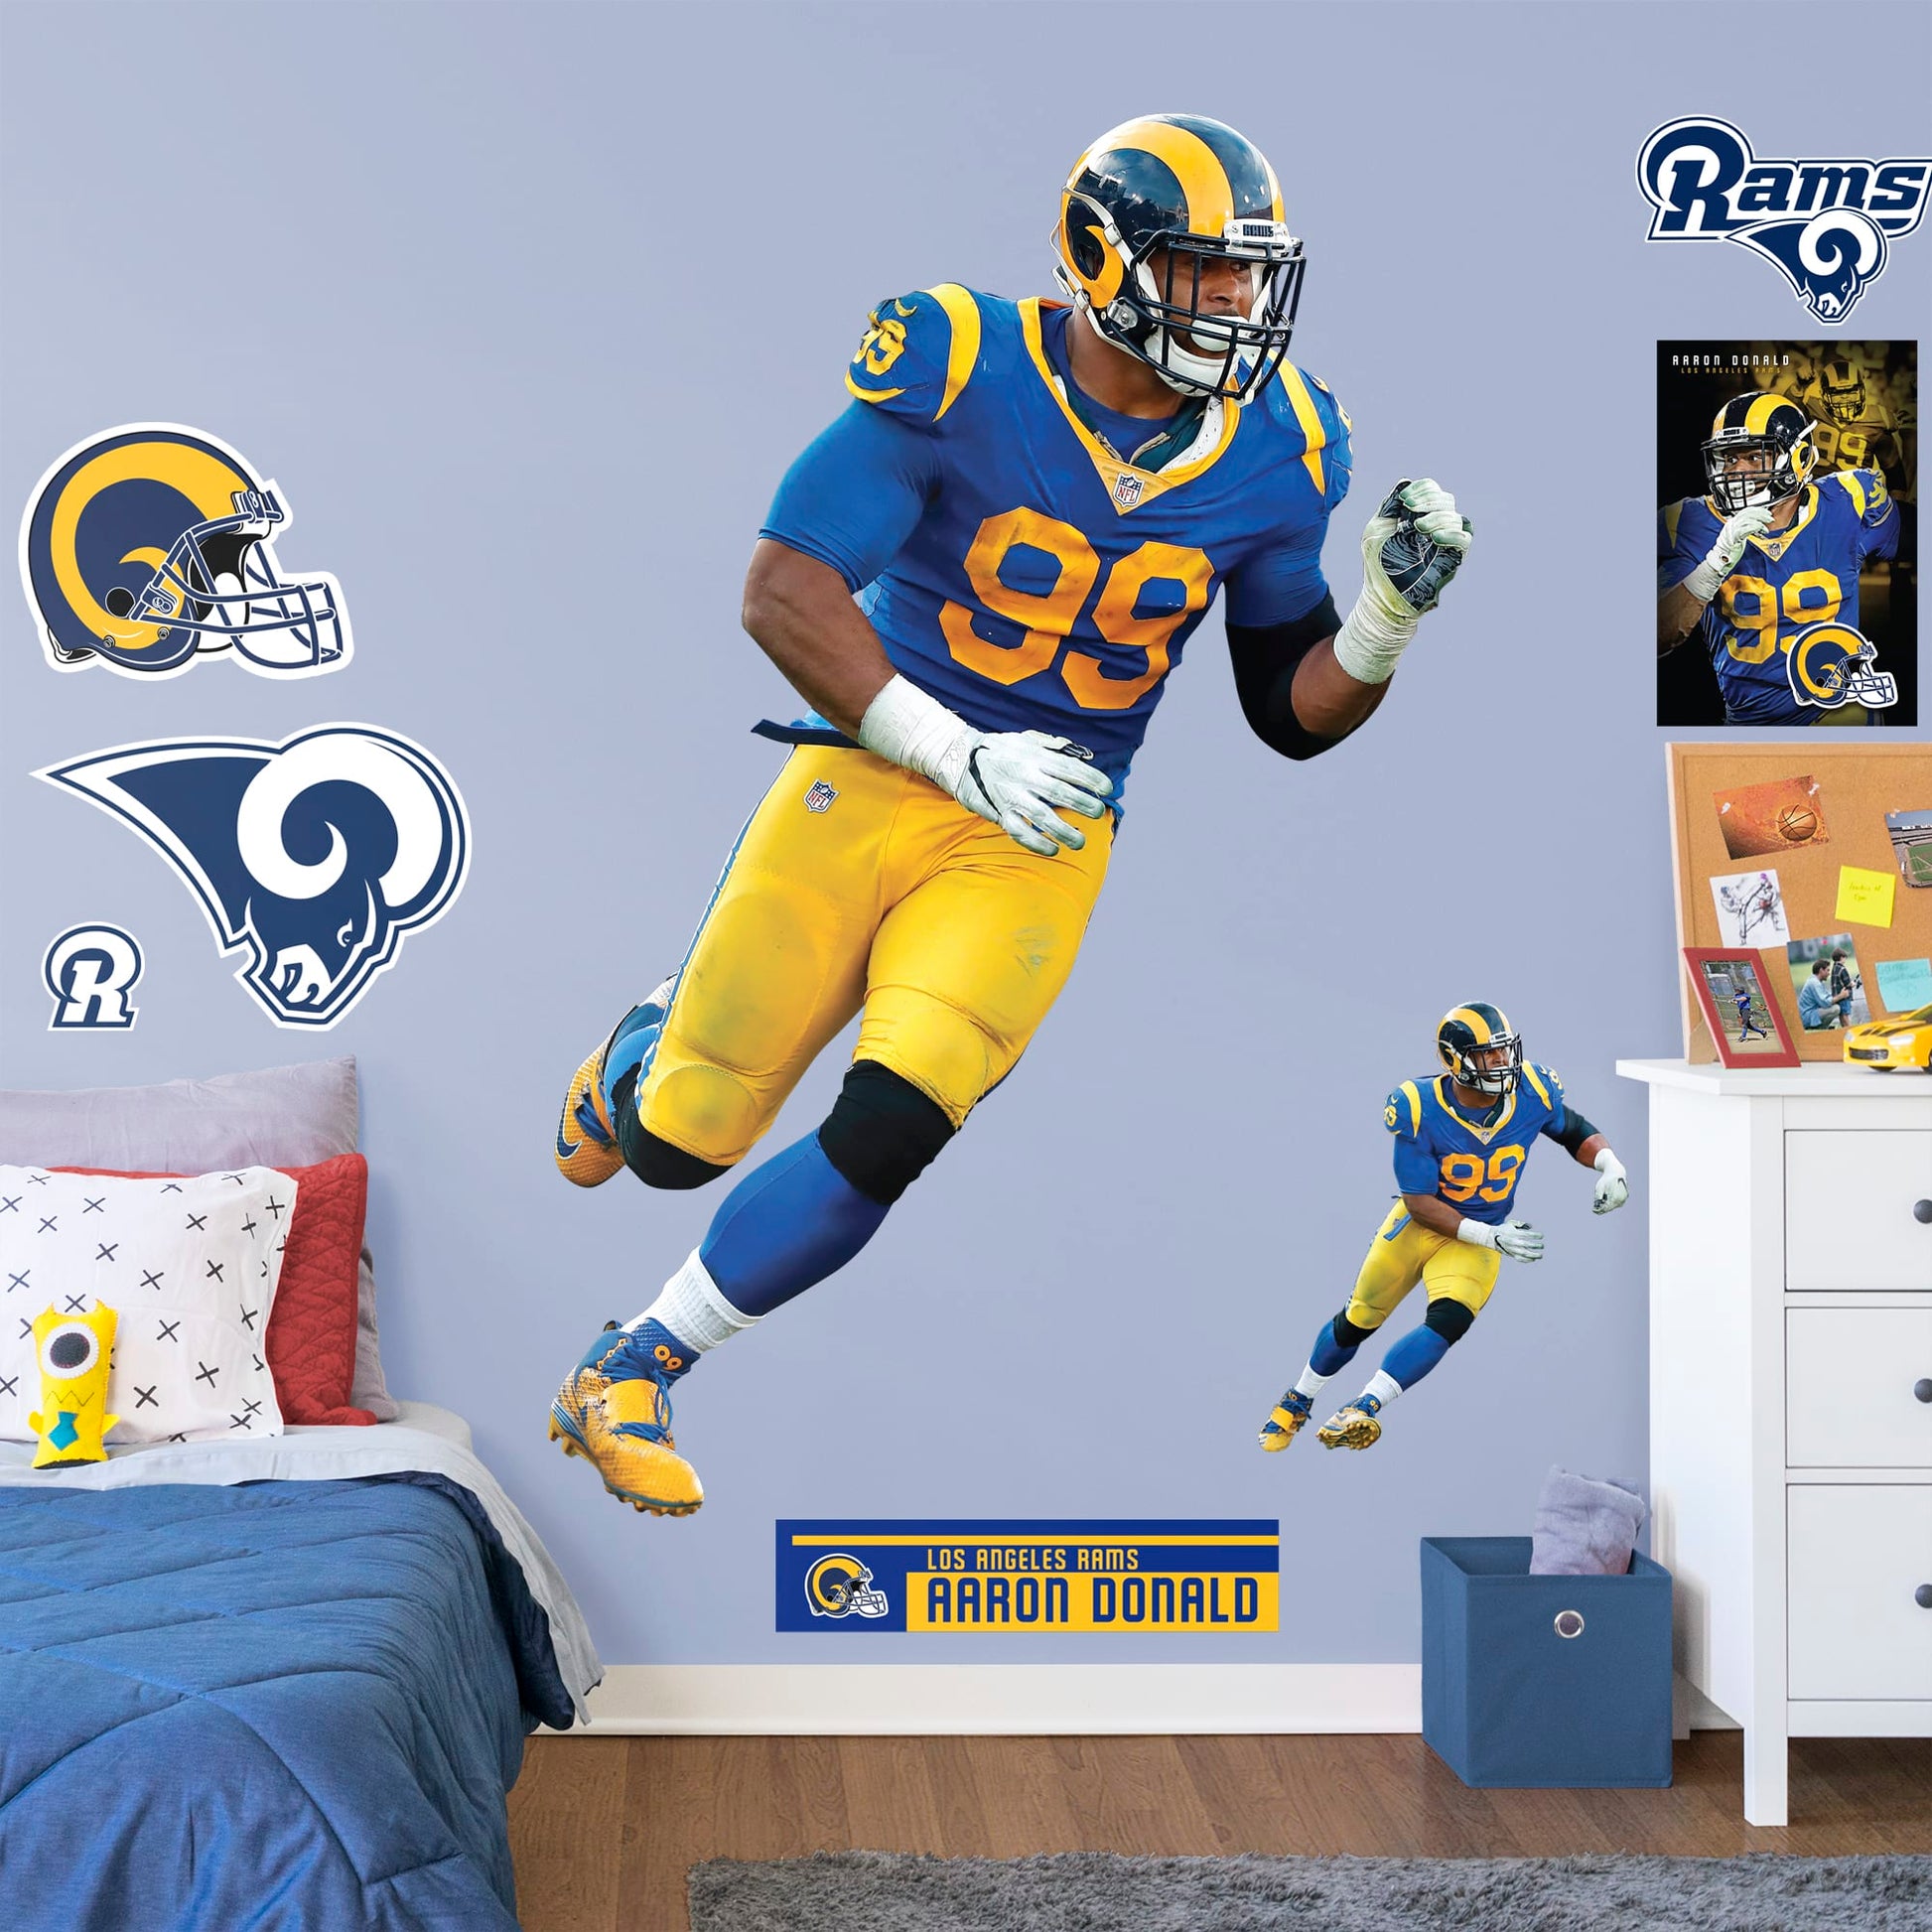 Rams uniforms: Which throwback jersey should make a comeback